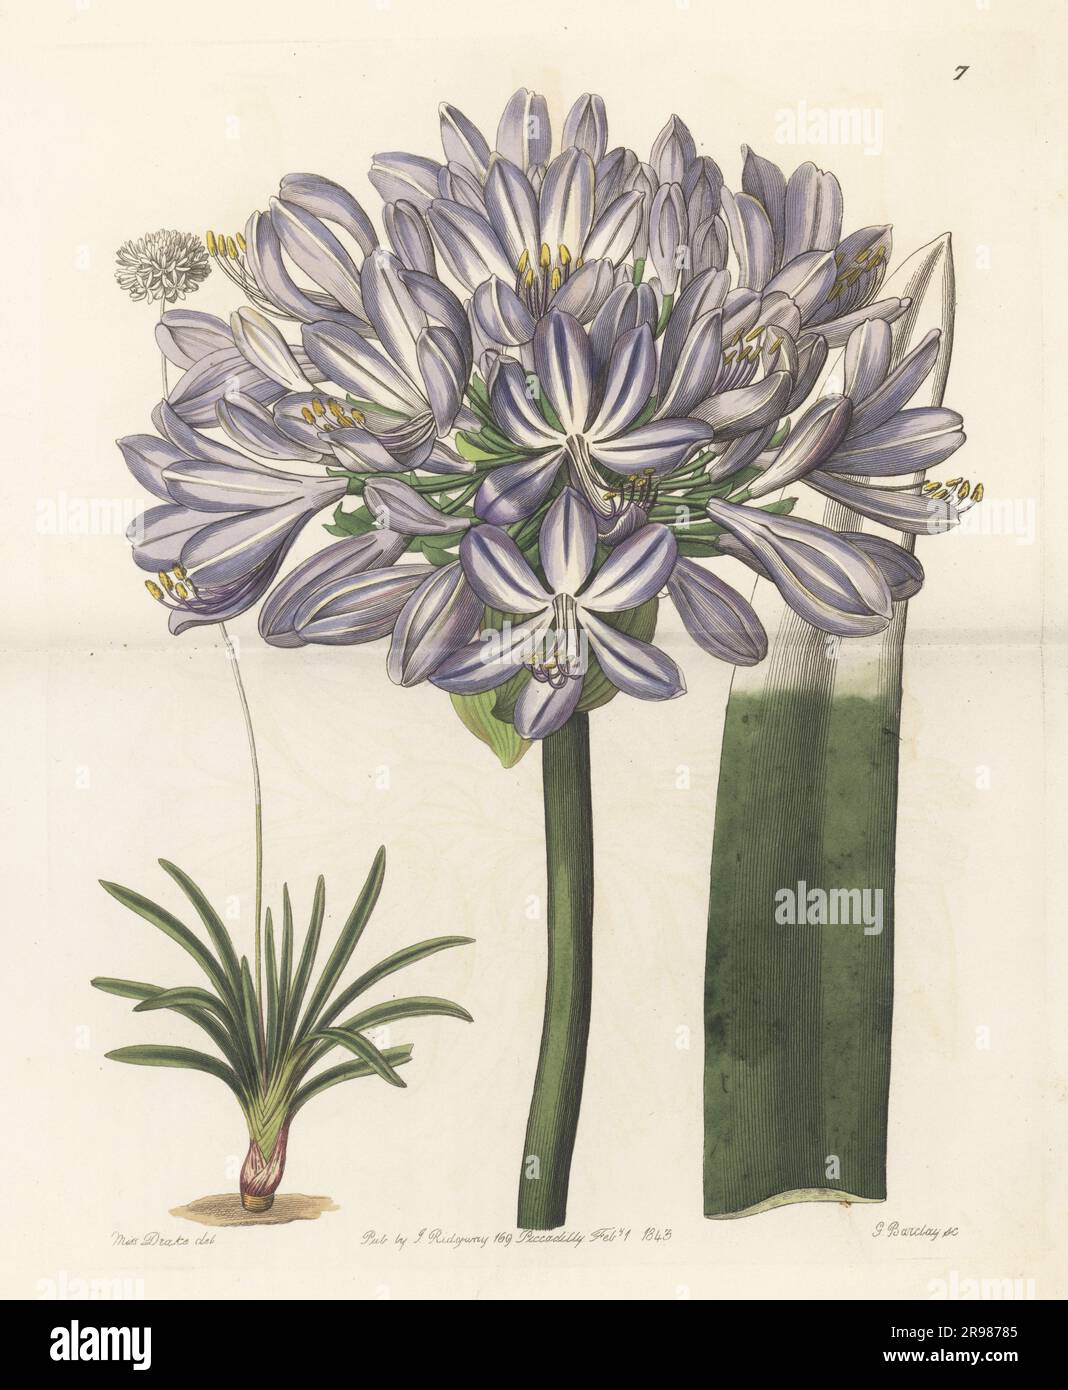 Agapanthus, blue lily or African lily, Agapanthus praecox subsp. orientalis. Native to Kwa-Zulu Natal and Western Cape, South Africa. Large-flowered African blue lily, Agapanthus umbellatus var. maximus. Handcoloured copperplate engraving by George Barclay after a botanical illustration by Sarah Drake from Edwards’ Botanical Register, continued by John Lindley, published by James Ridgway, London, 1843. Stock Photo